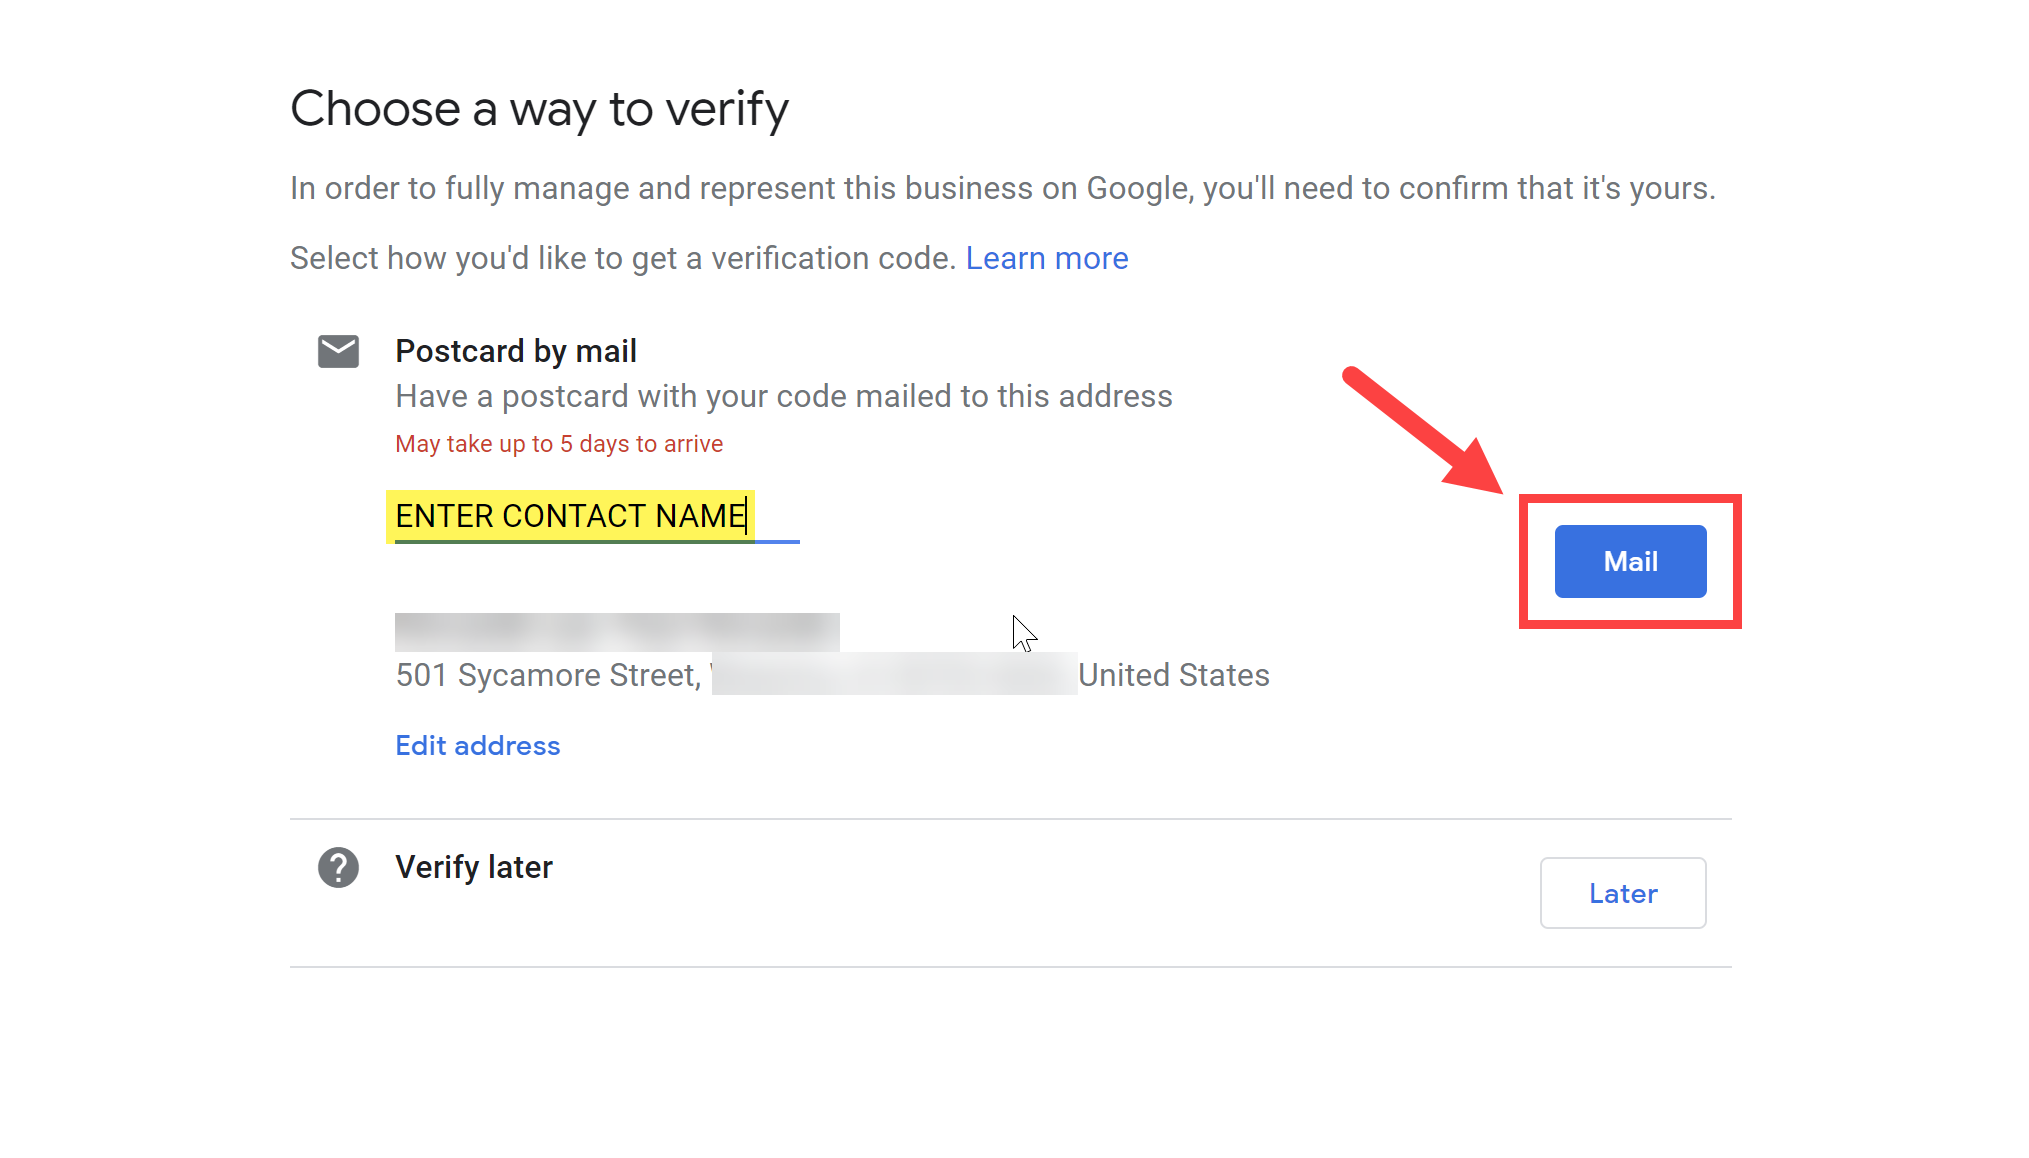 Choose Mail as a way to verify.